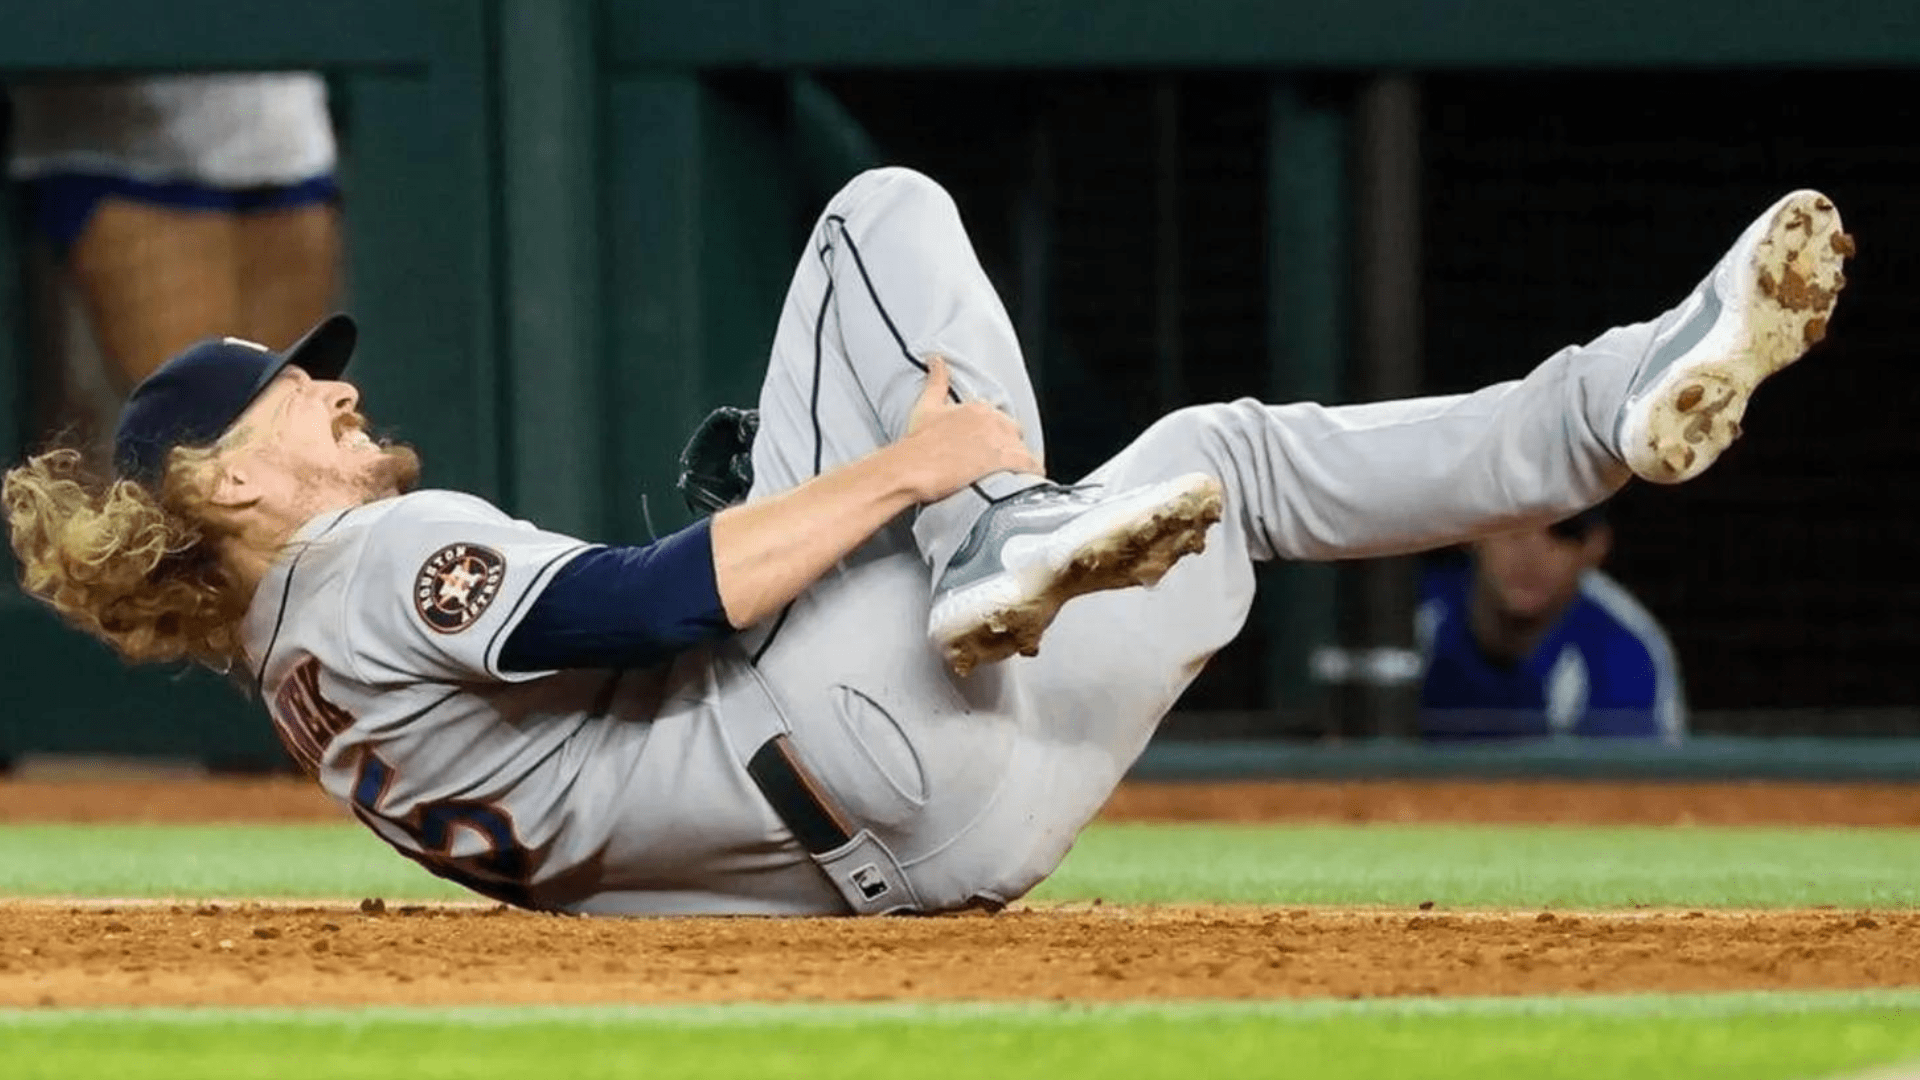 Ryne Stanek injury update: Astros manager Dusty Baker shines light upon the  relief pitcher's ankle injury